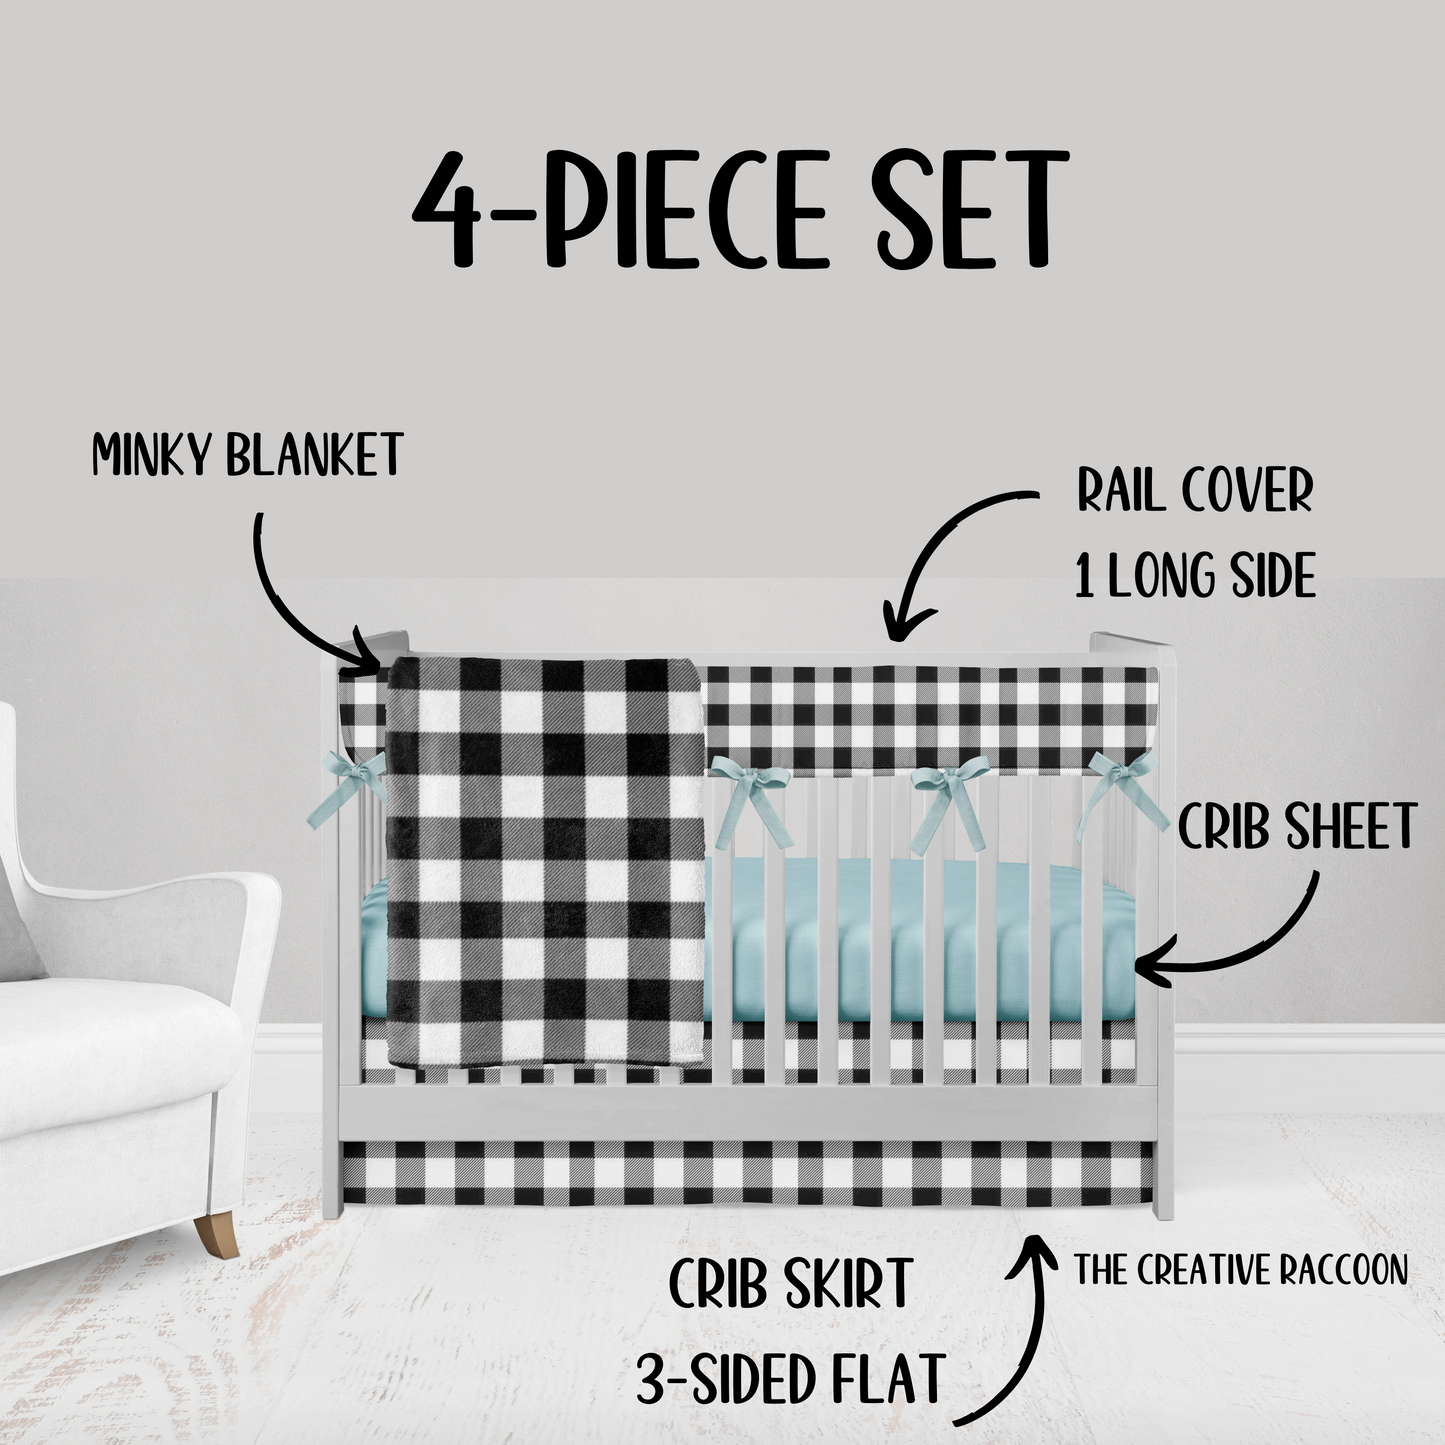 4-piece set- black gingham blanket, rail cover & crib skirt with aqua sheet and aqua ties on the rail cover. all the gingham check will be the same size squares.